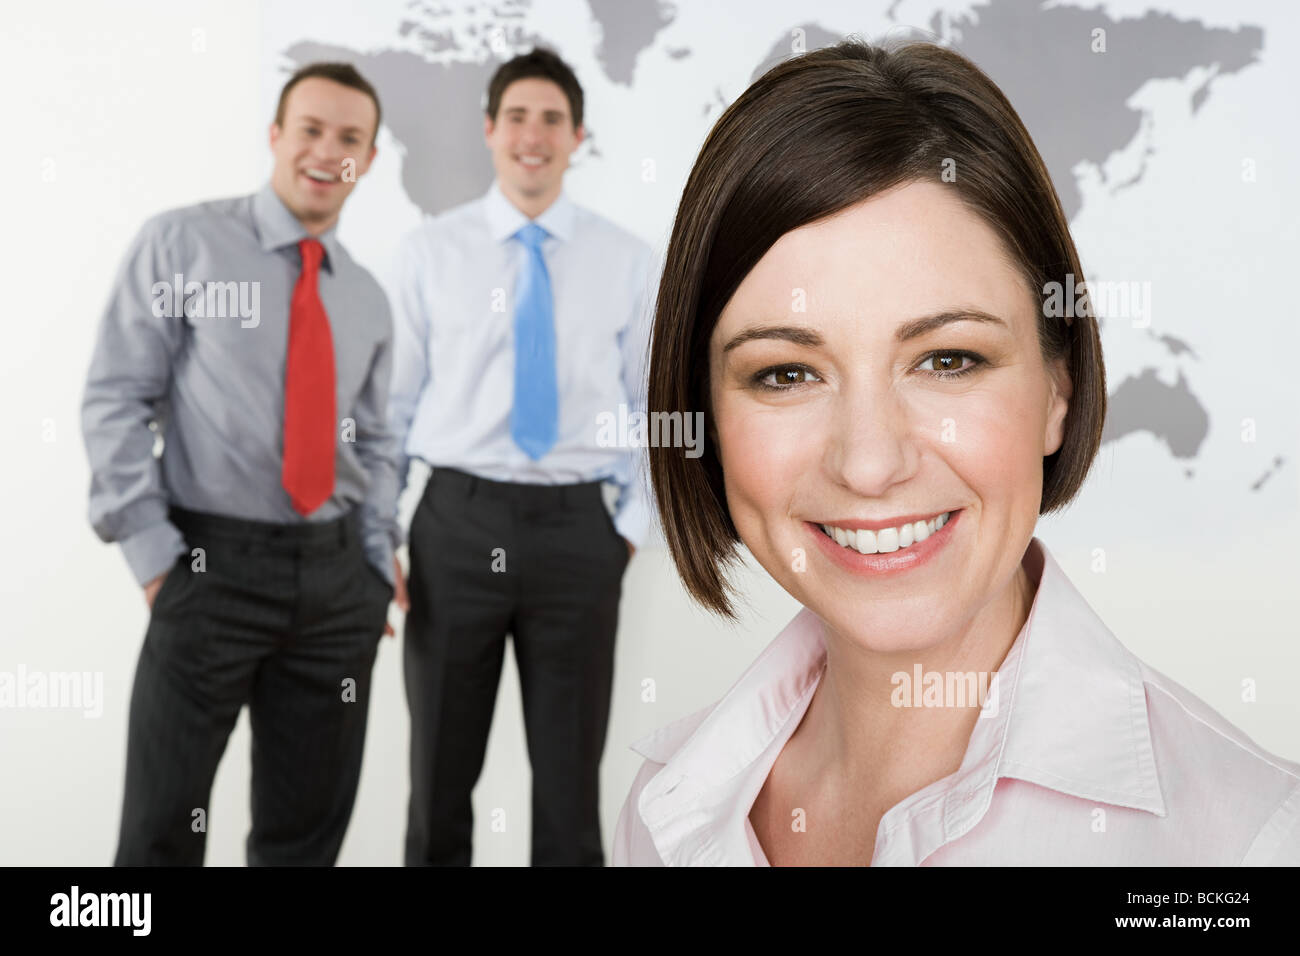 Businesswoman and businessmen Stock Photo